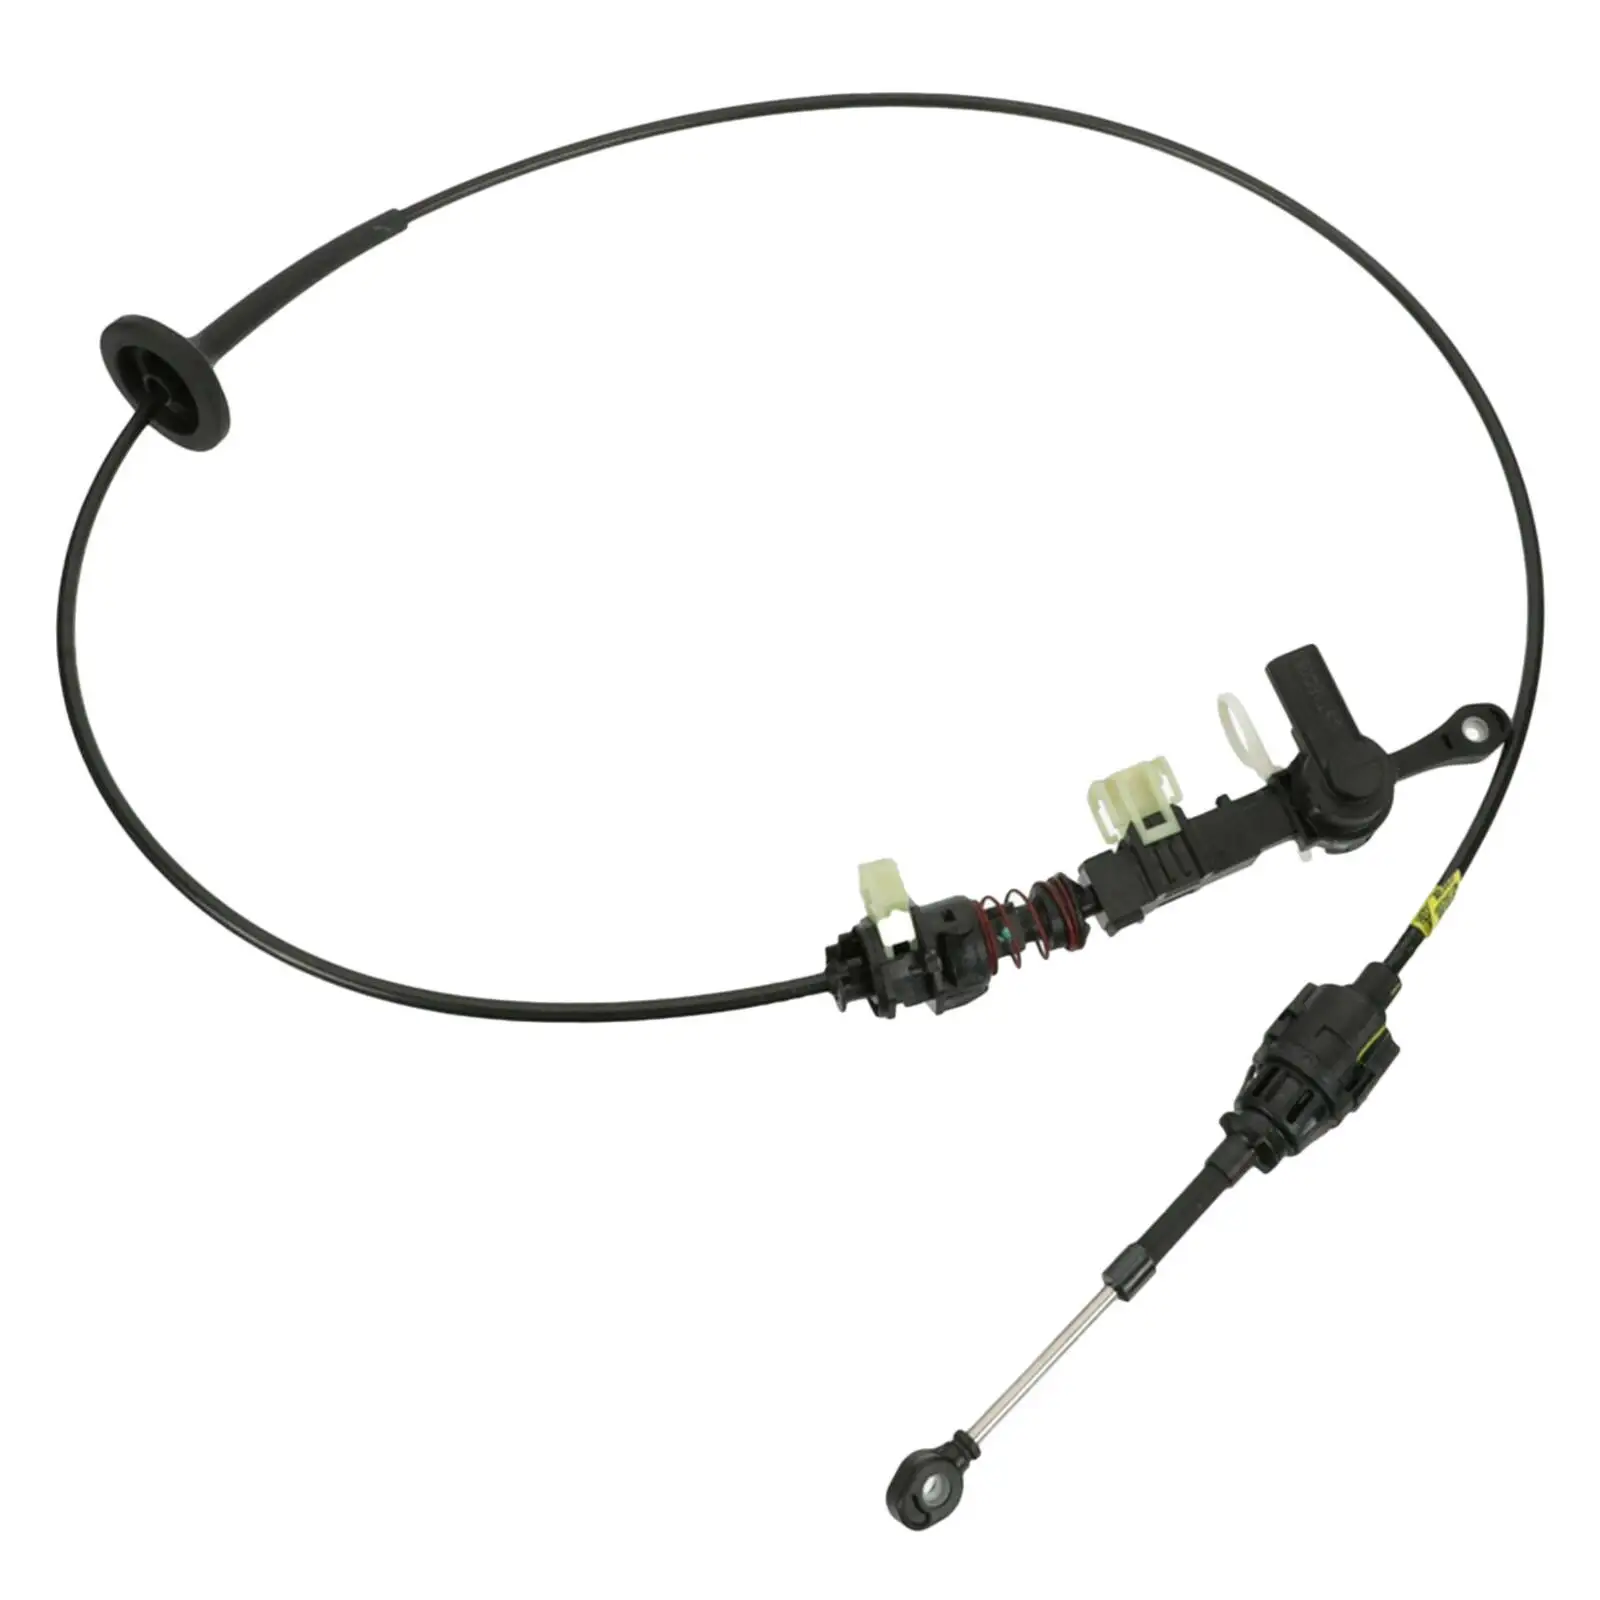 68in Shifts Control Cable Assist Parts Replacemets Transmission Gear Shifter Cable Fit for RAM Pickup 3500 02-10 2500